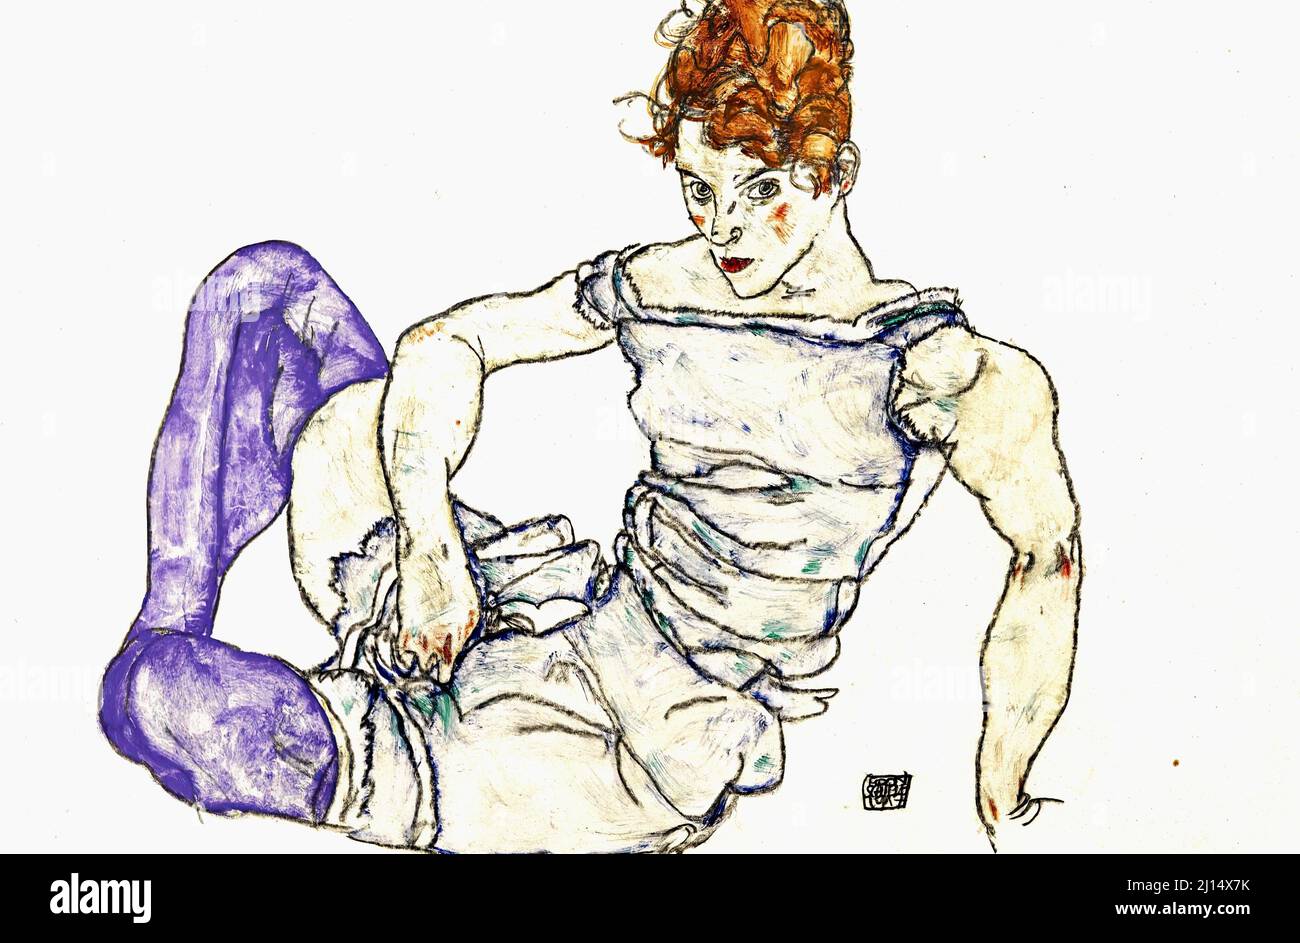 Egon Schiele - Seated Woman In Violet Stockings - 1917 Stock Photo